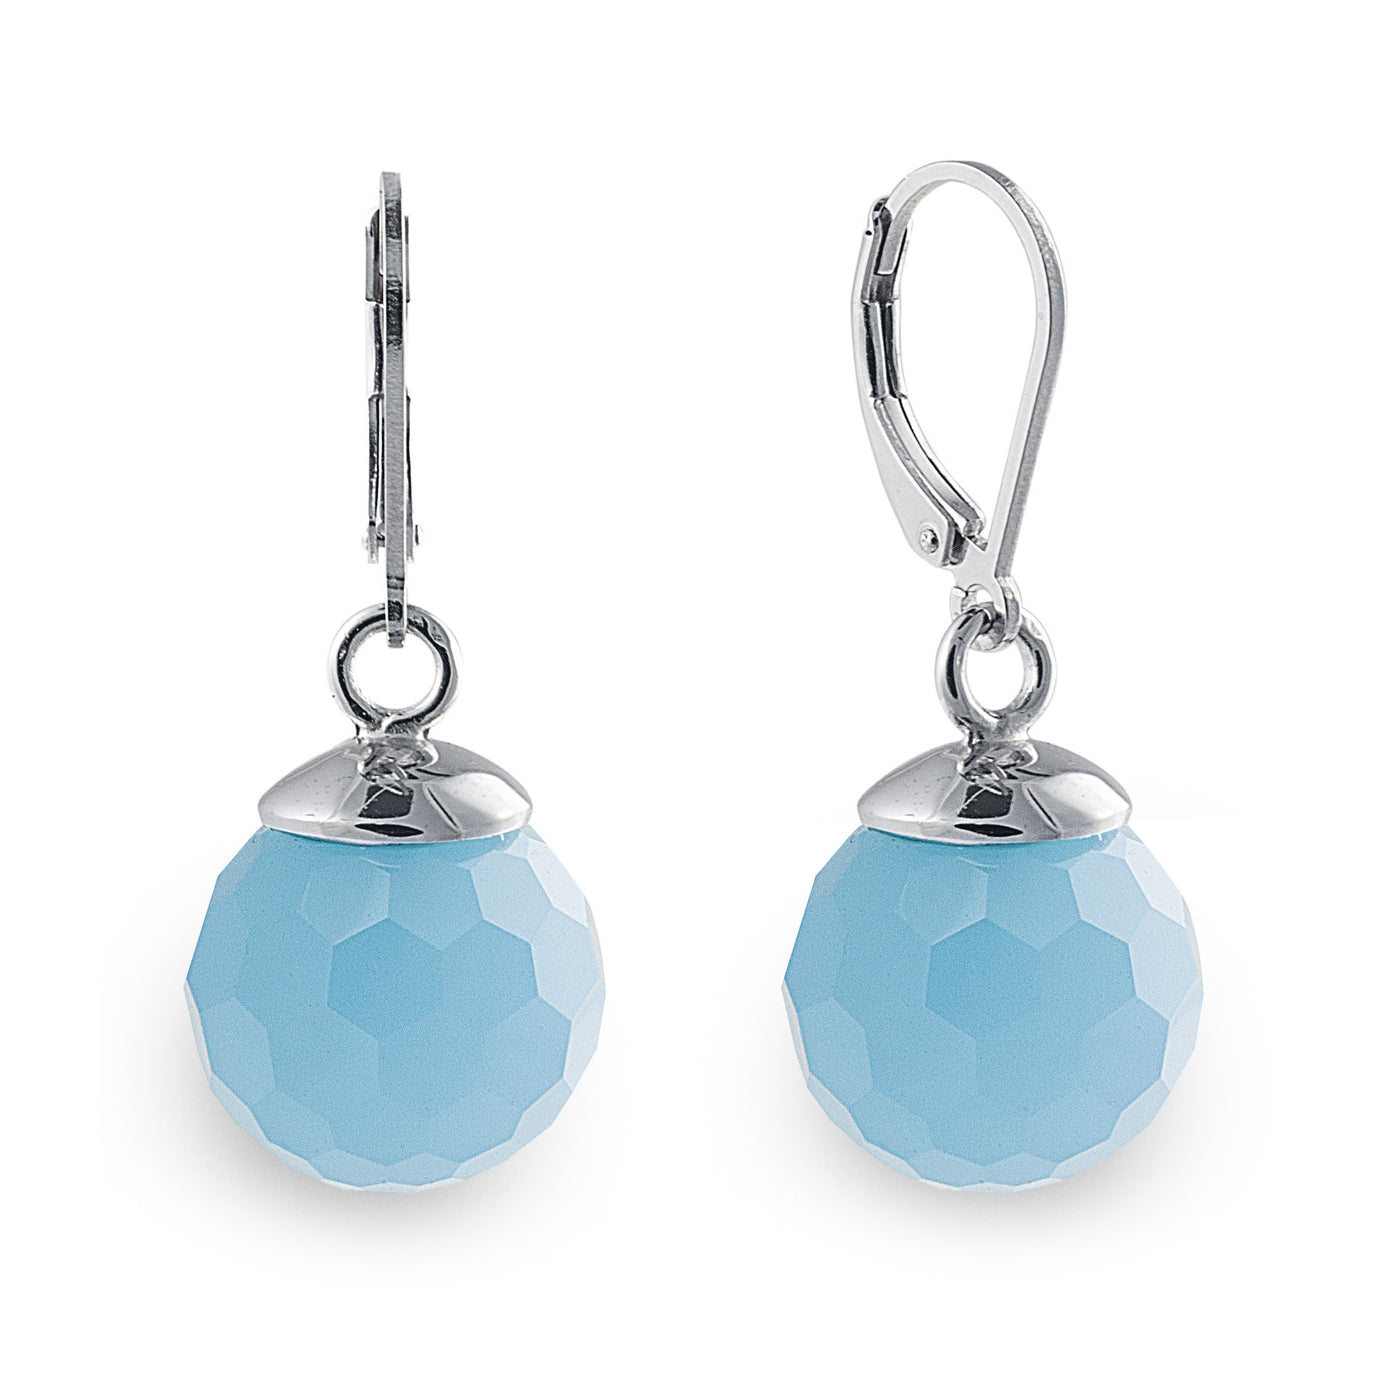 The Sky Blue Lopez Drop Earrings are made of 925 sterling silver and feature facet-cut blue obsidian with European ear hooks. Simple elegance suitable for everyday wear. More colours and matching rings are available. Jewellery by Bellagio & Co. Worldwide Shipping. Free shipping for orders over $150.00 within Australia.